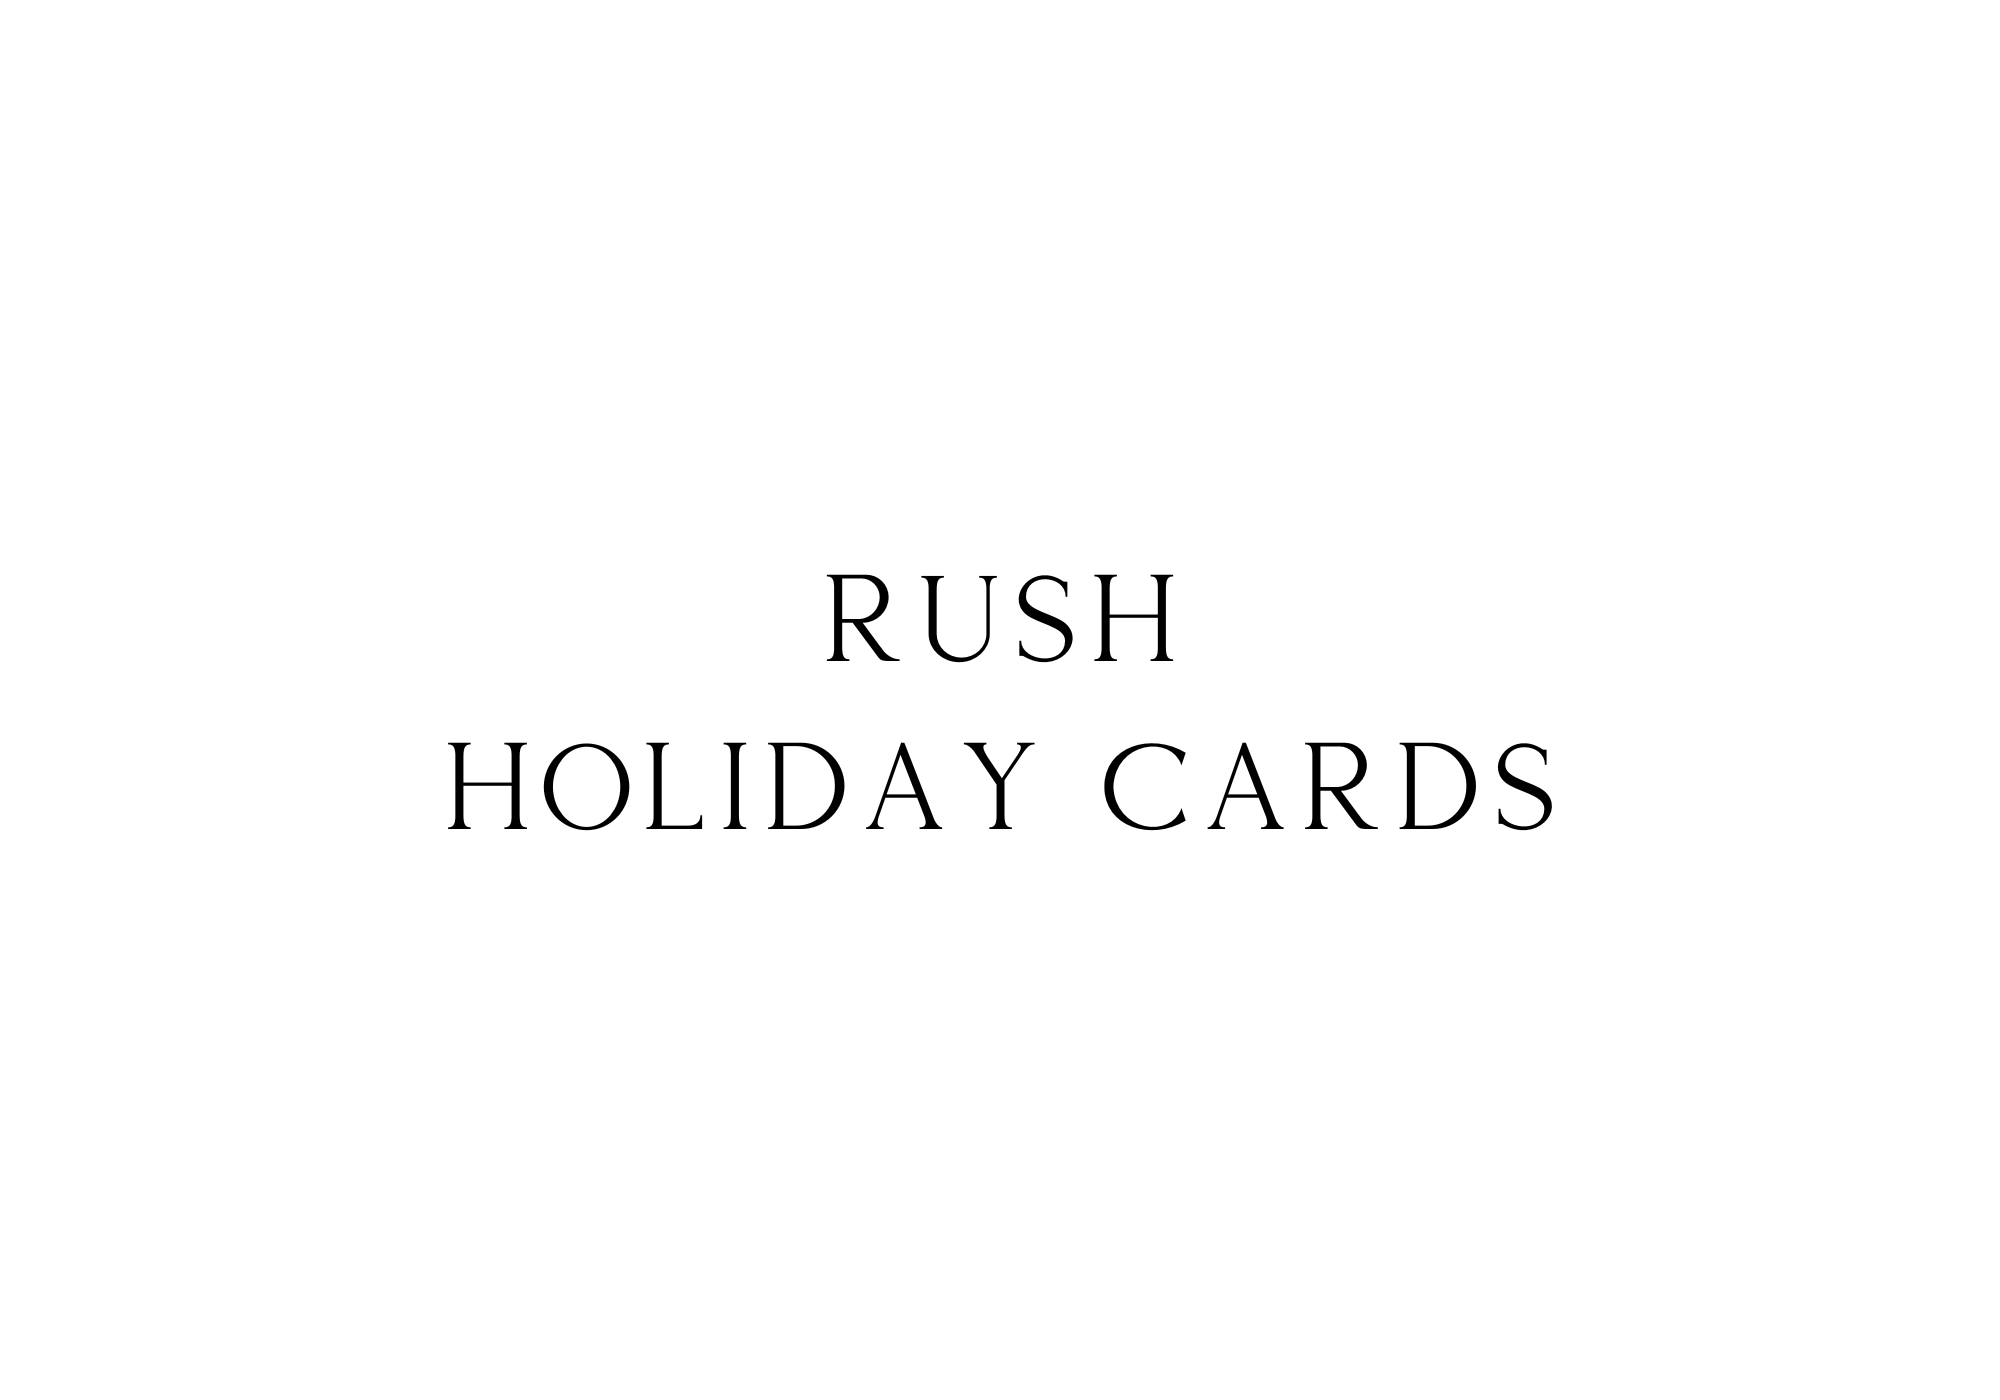 Rush Holiday Cards